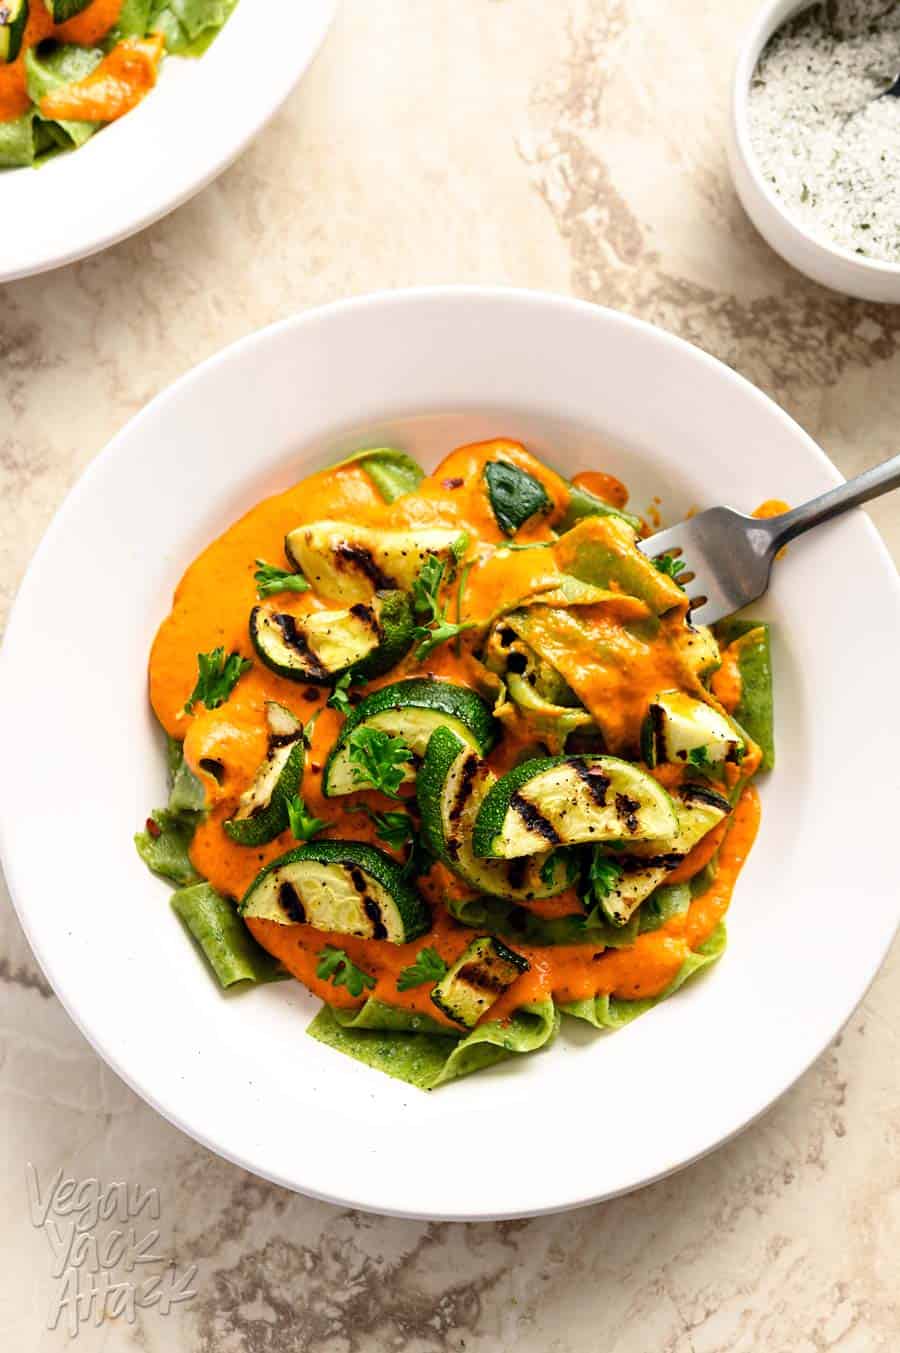 This recipe for homemade Spinach Pappardelle with Roasted Red Pepper Sauce is intensely flavorful and pretty easy to make! Plus, it’s dairy-free and egg-free. #vegan #plantbased #pappardelle #redpeppers